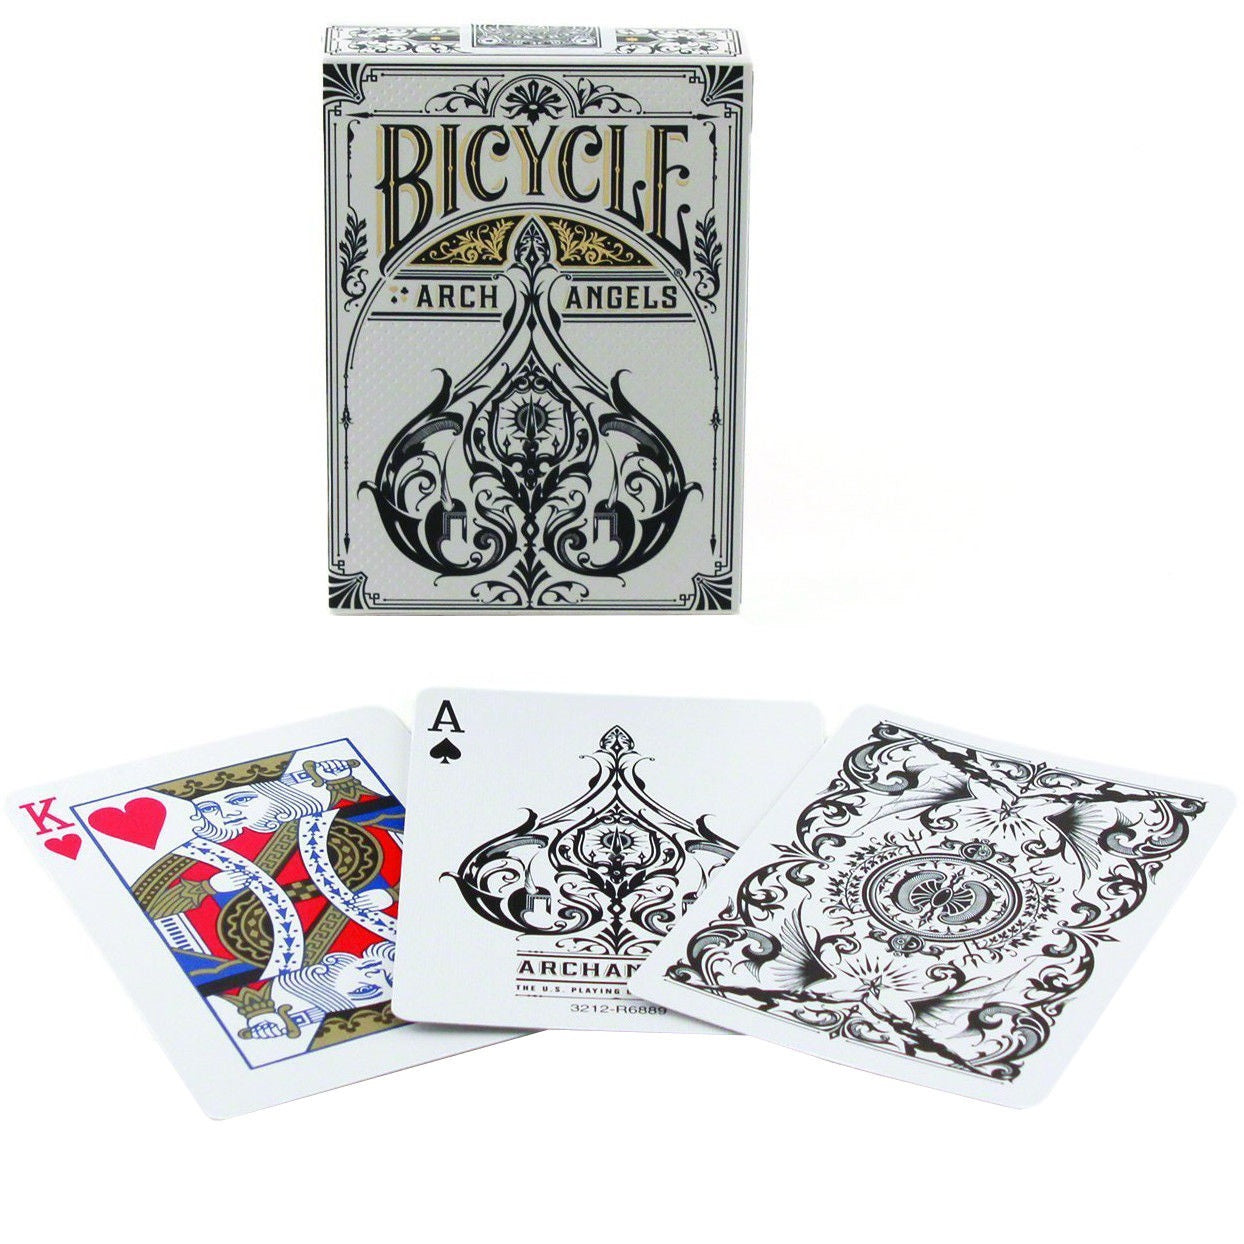 Arch Angels - Bicycle Cards